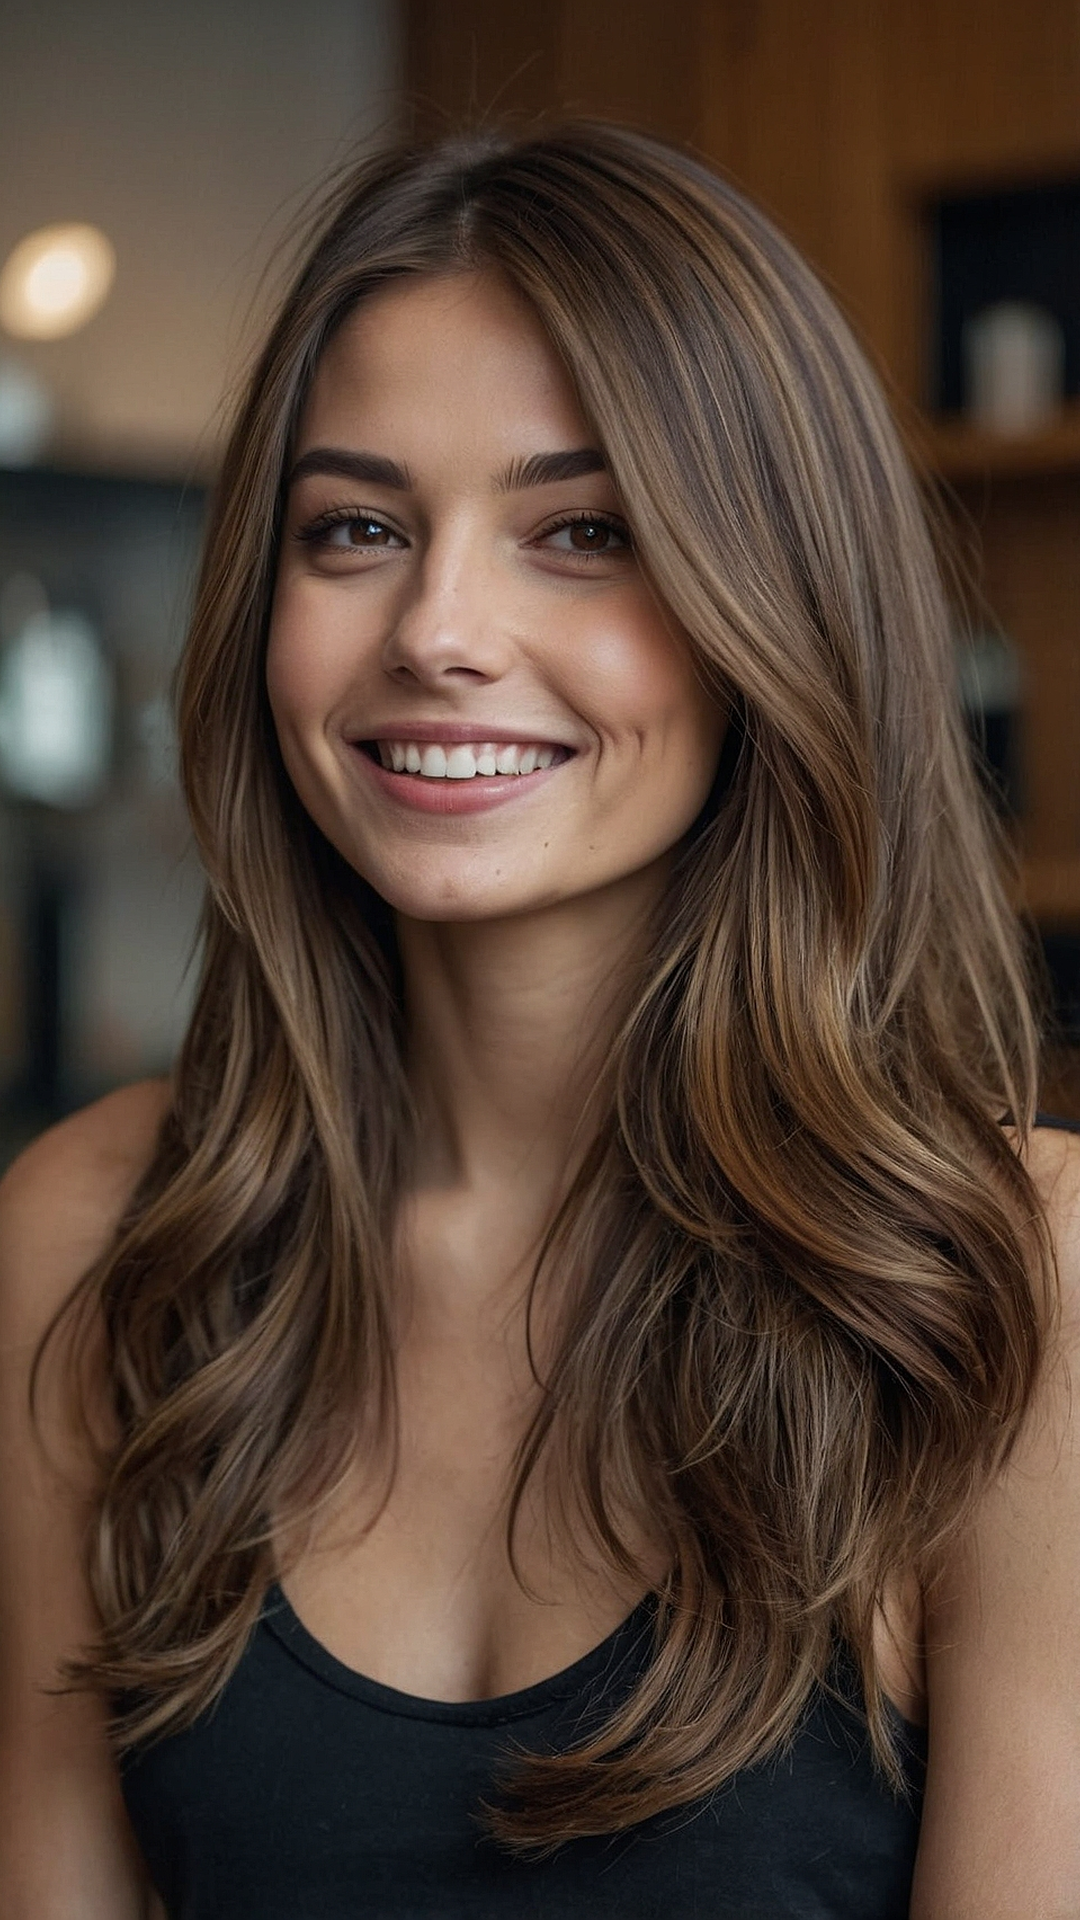 Sleek and Chic: Thin Hair Styles to Try